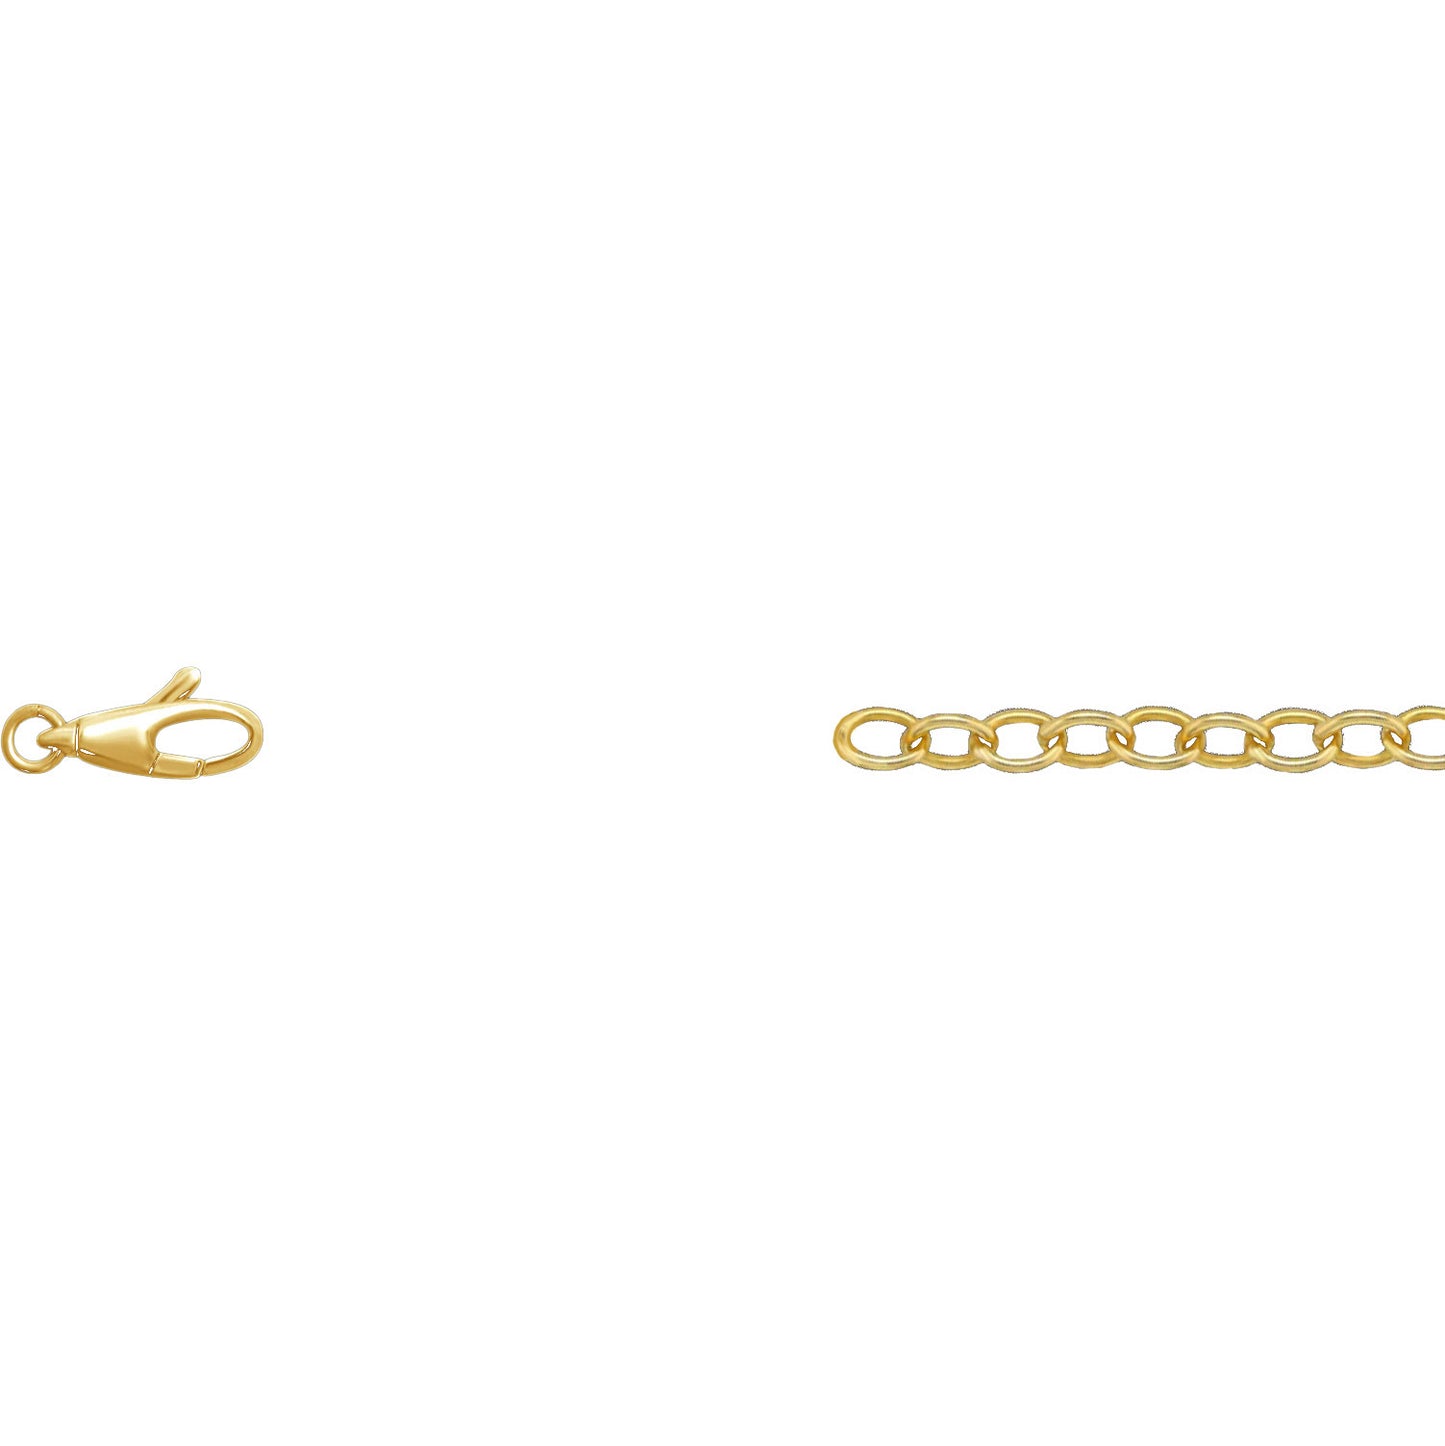 14k lobster clasp.